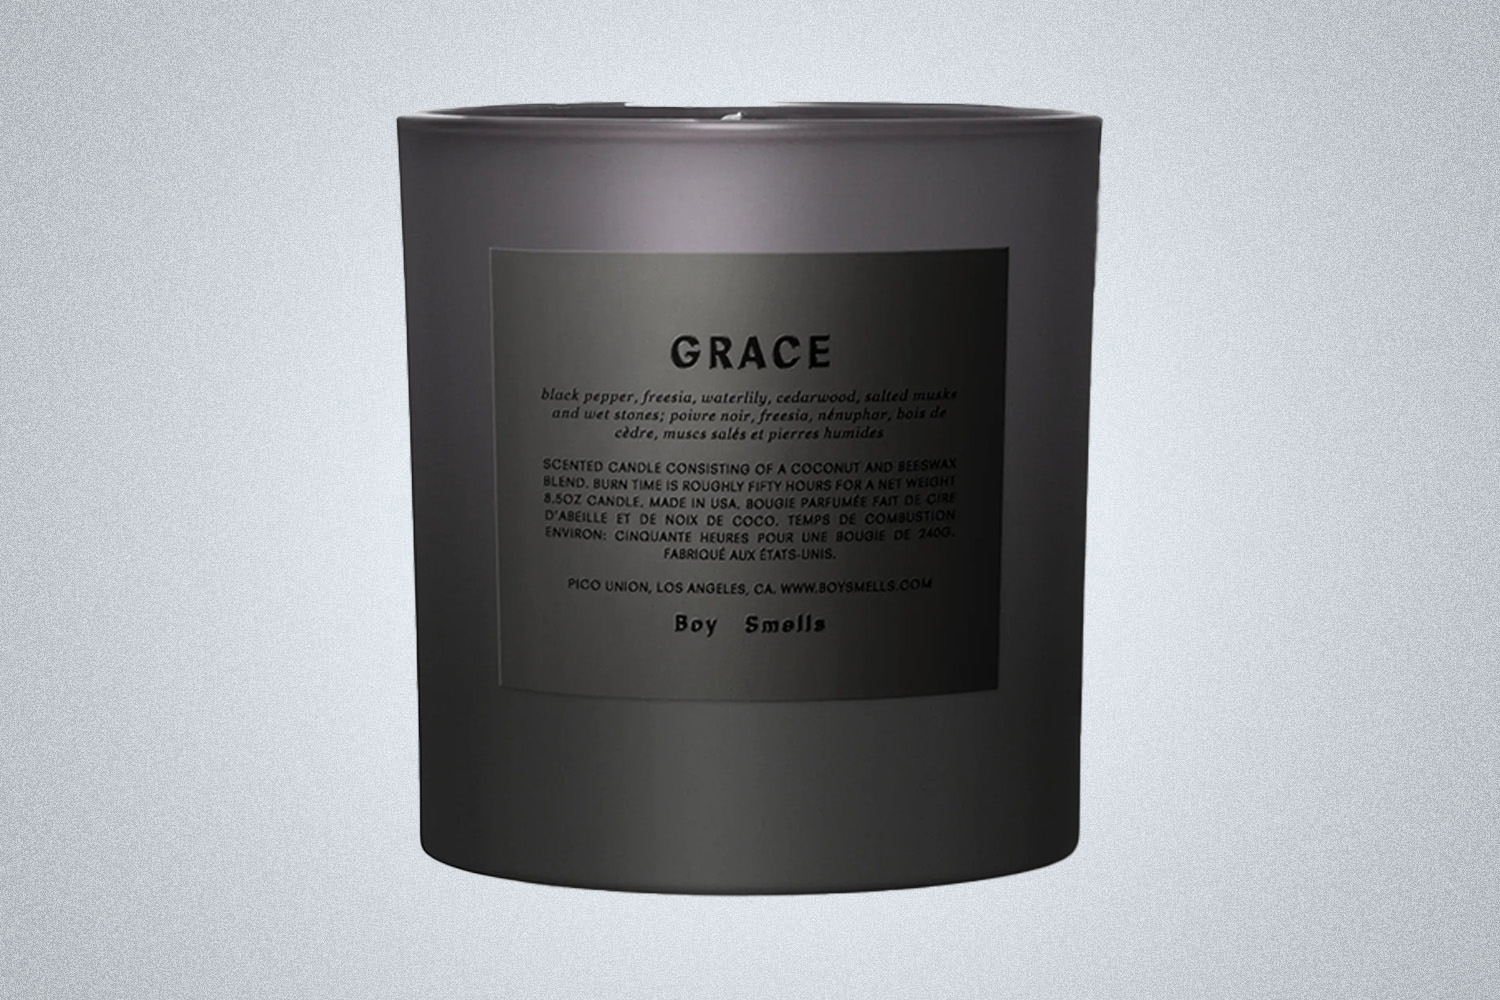 a black "Grace" candle by Boy Smells on a gray background